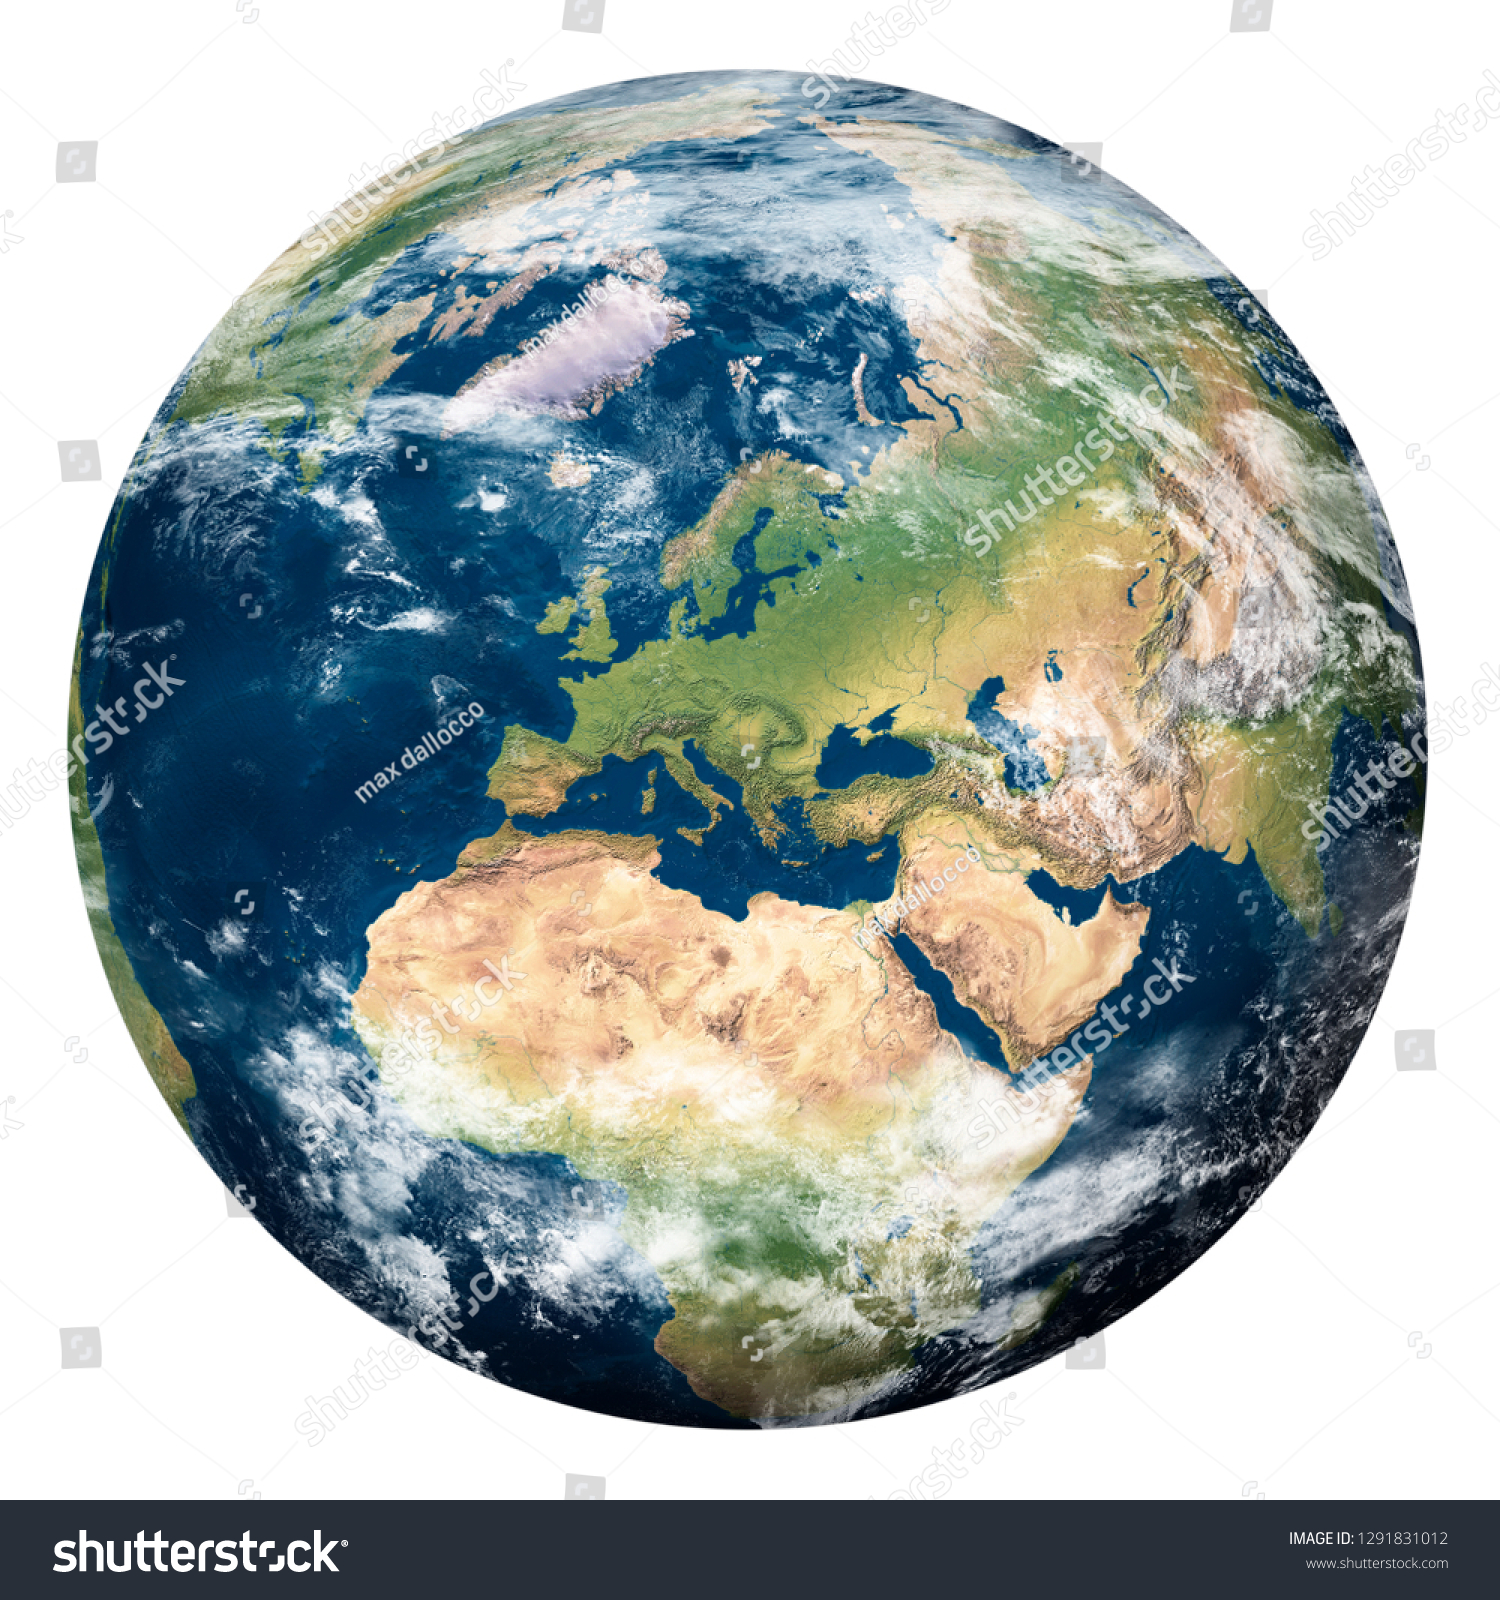 Planet Earth with clouds, Europe and part of Asia and Africa - Elements of this image furnished by NASA #1291831012